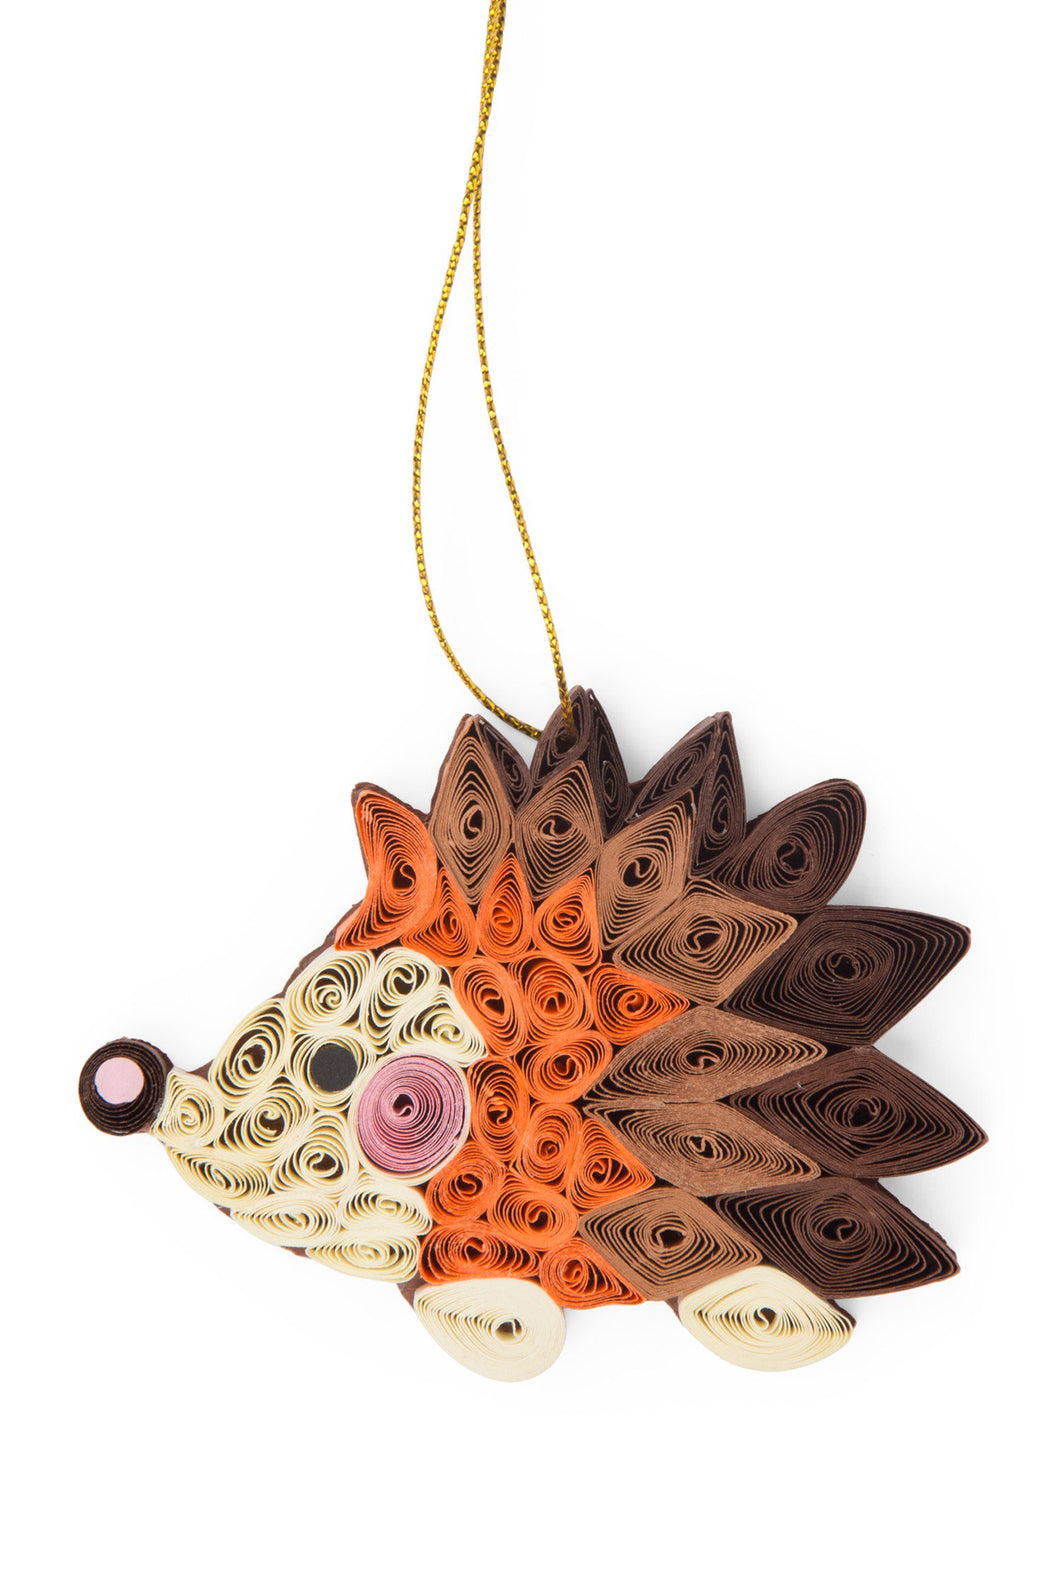 Quilled Hedgehog Ornament